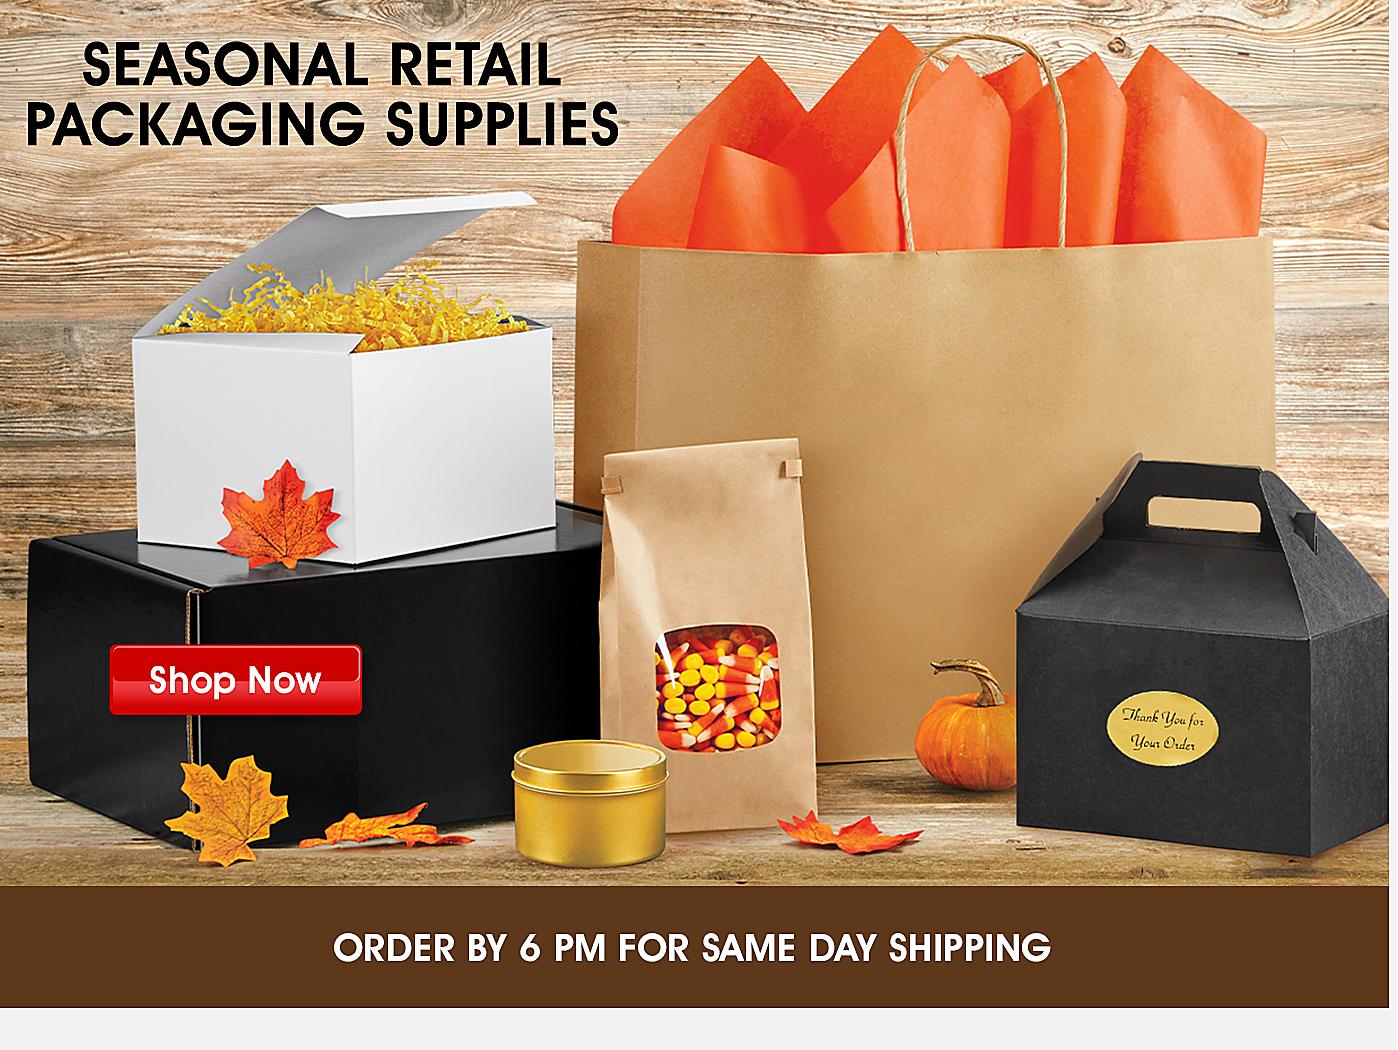 SEASONAL RETAIL PACKAGING SUPPLIES. Shop Now. ORDER BY 6 PM FOR SAME DAY SHIPPING